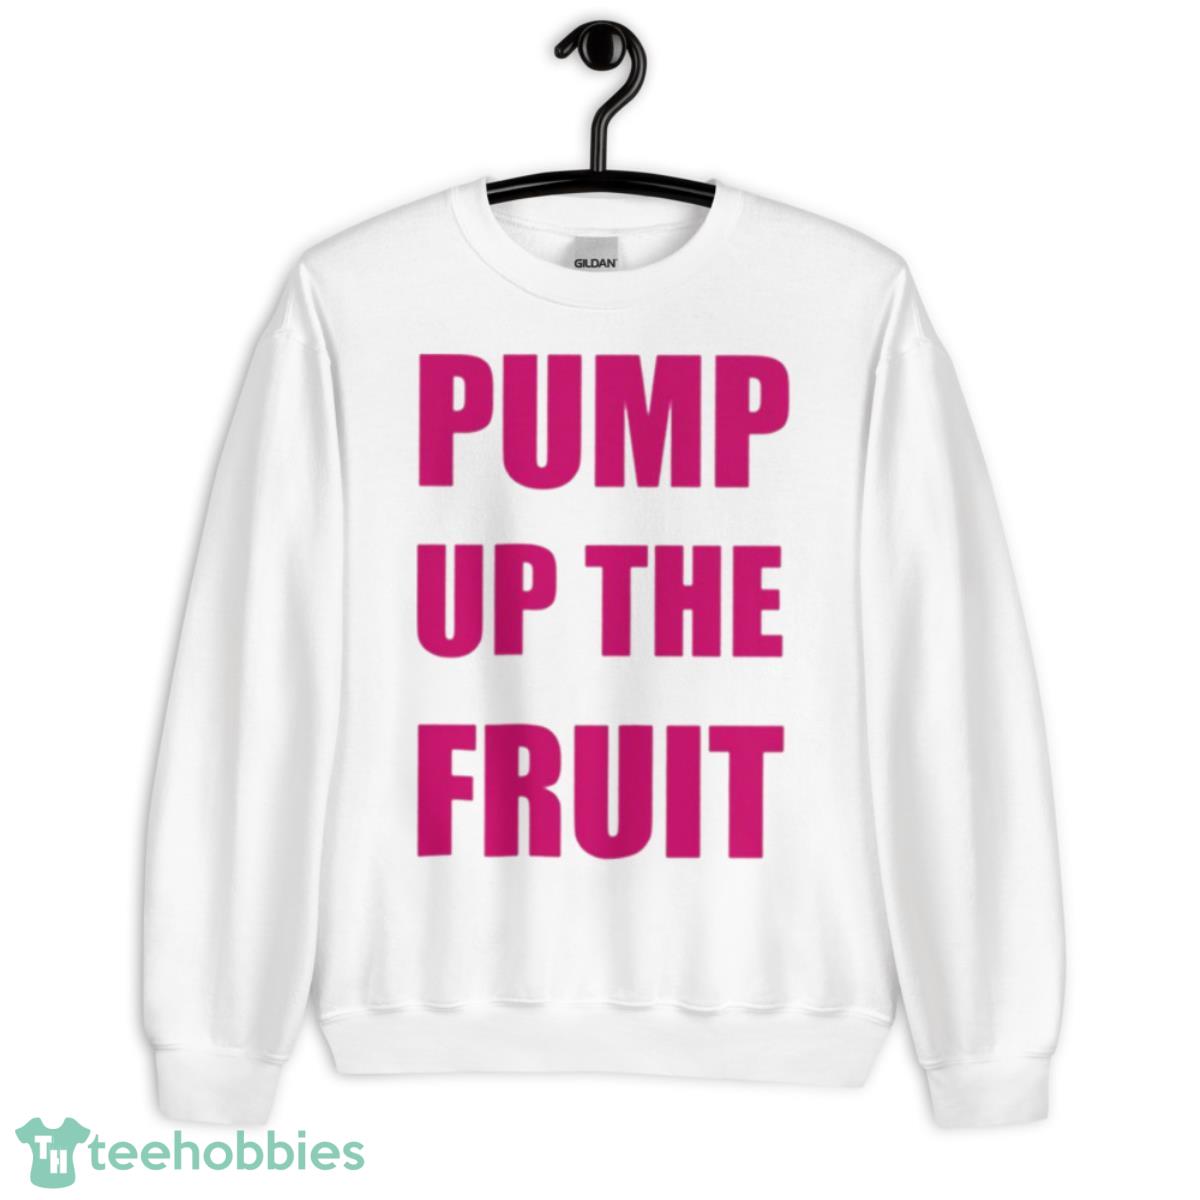 iCarly - Pump Up The Fruit Girls Youth T-Shirt 